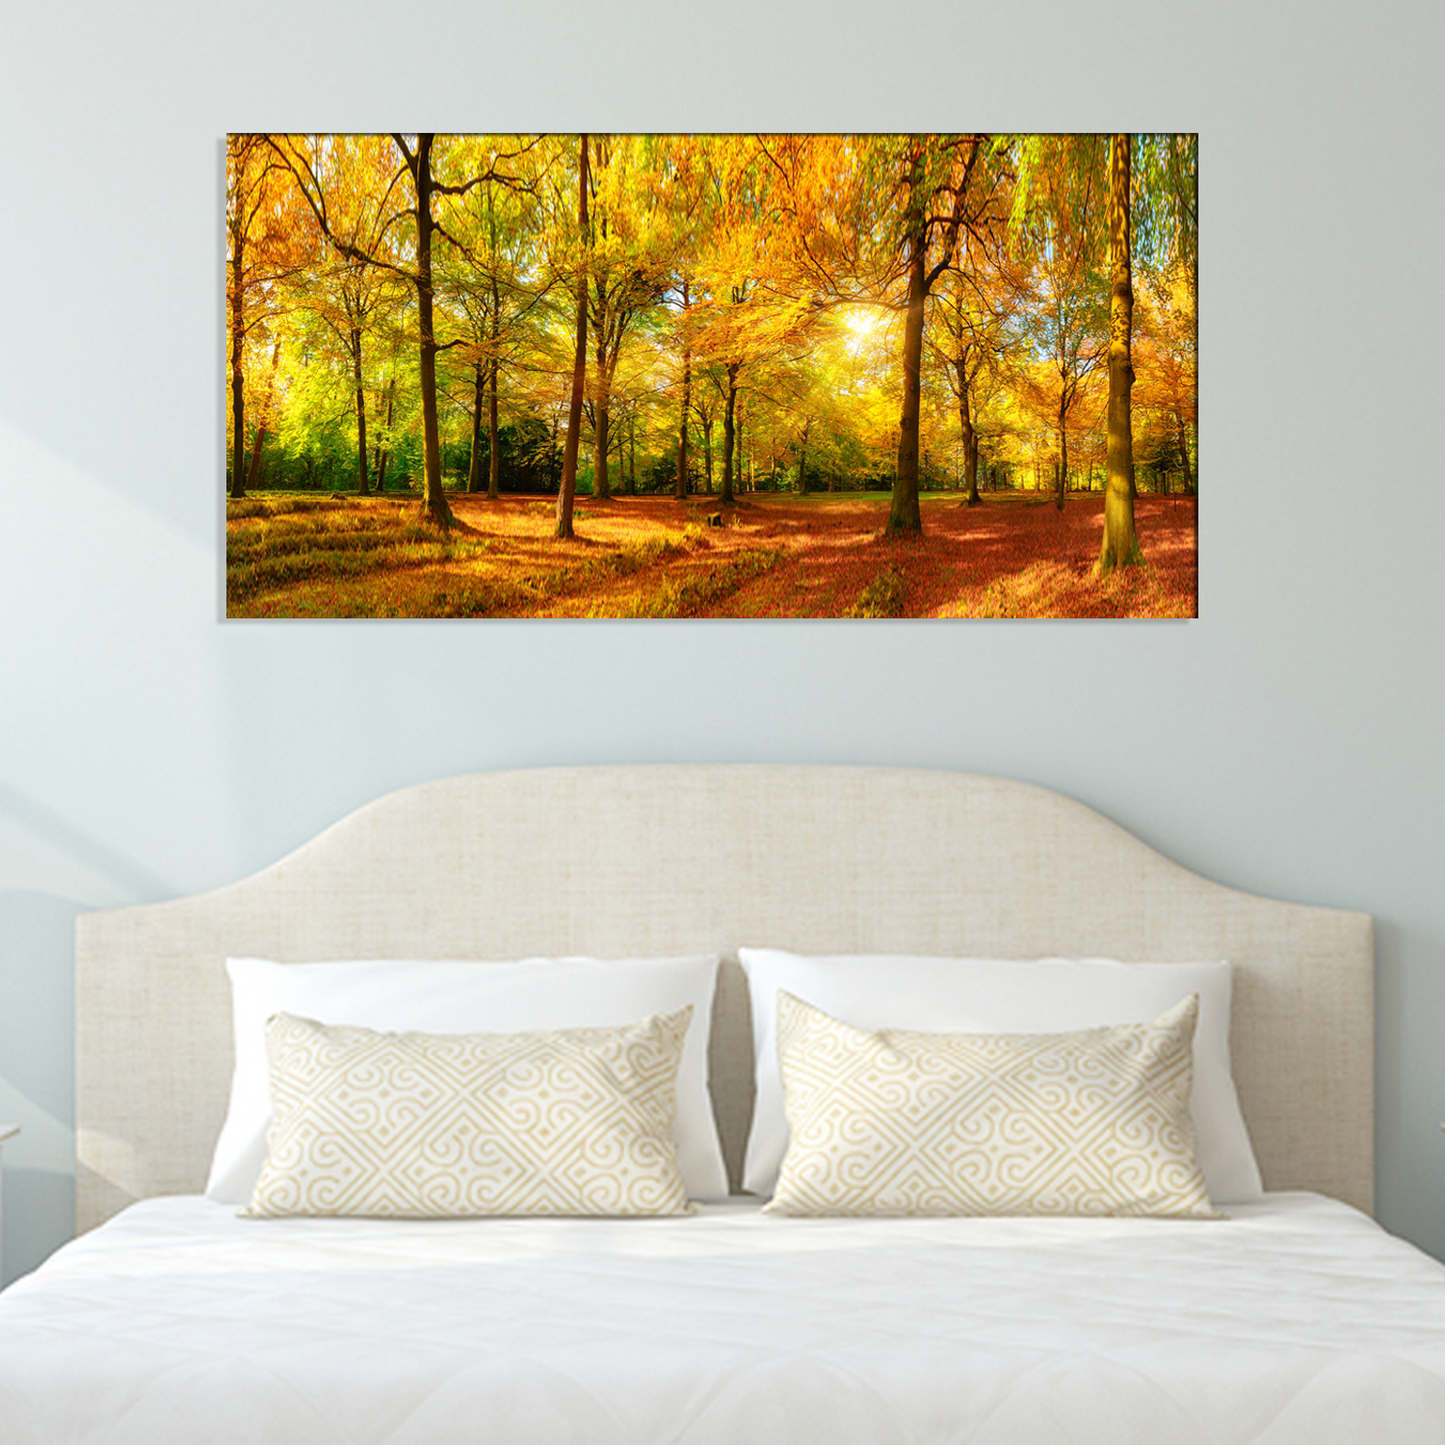 Forest at Sunny Day Canvas Print Wall Painting